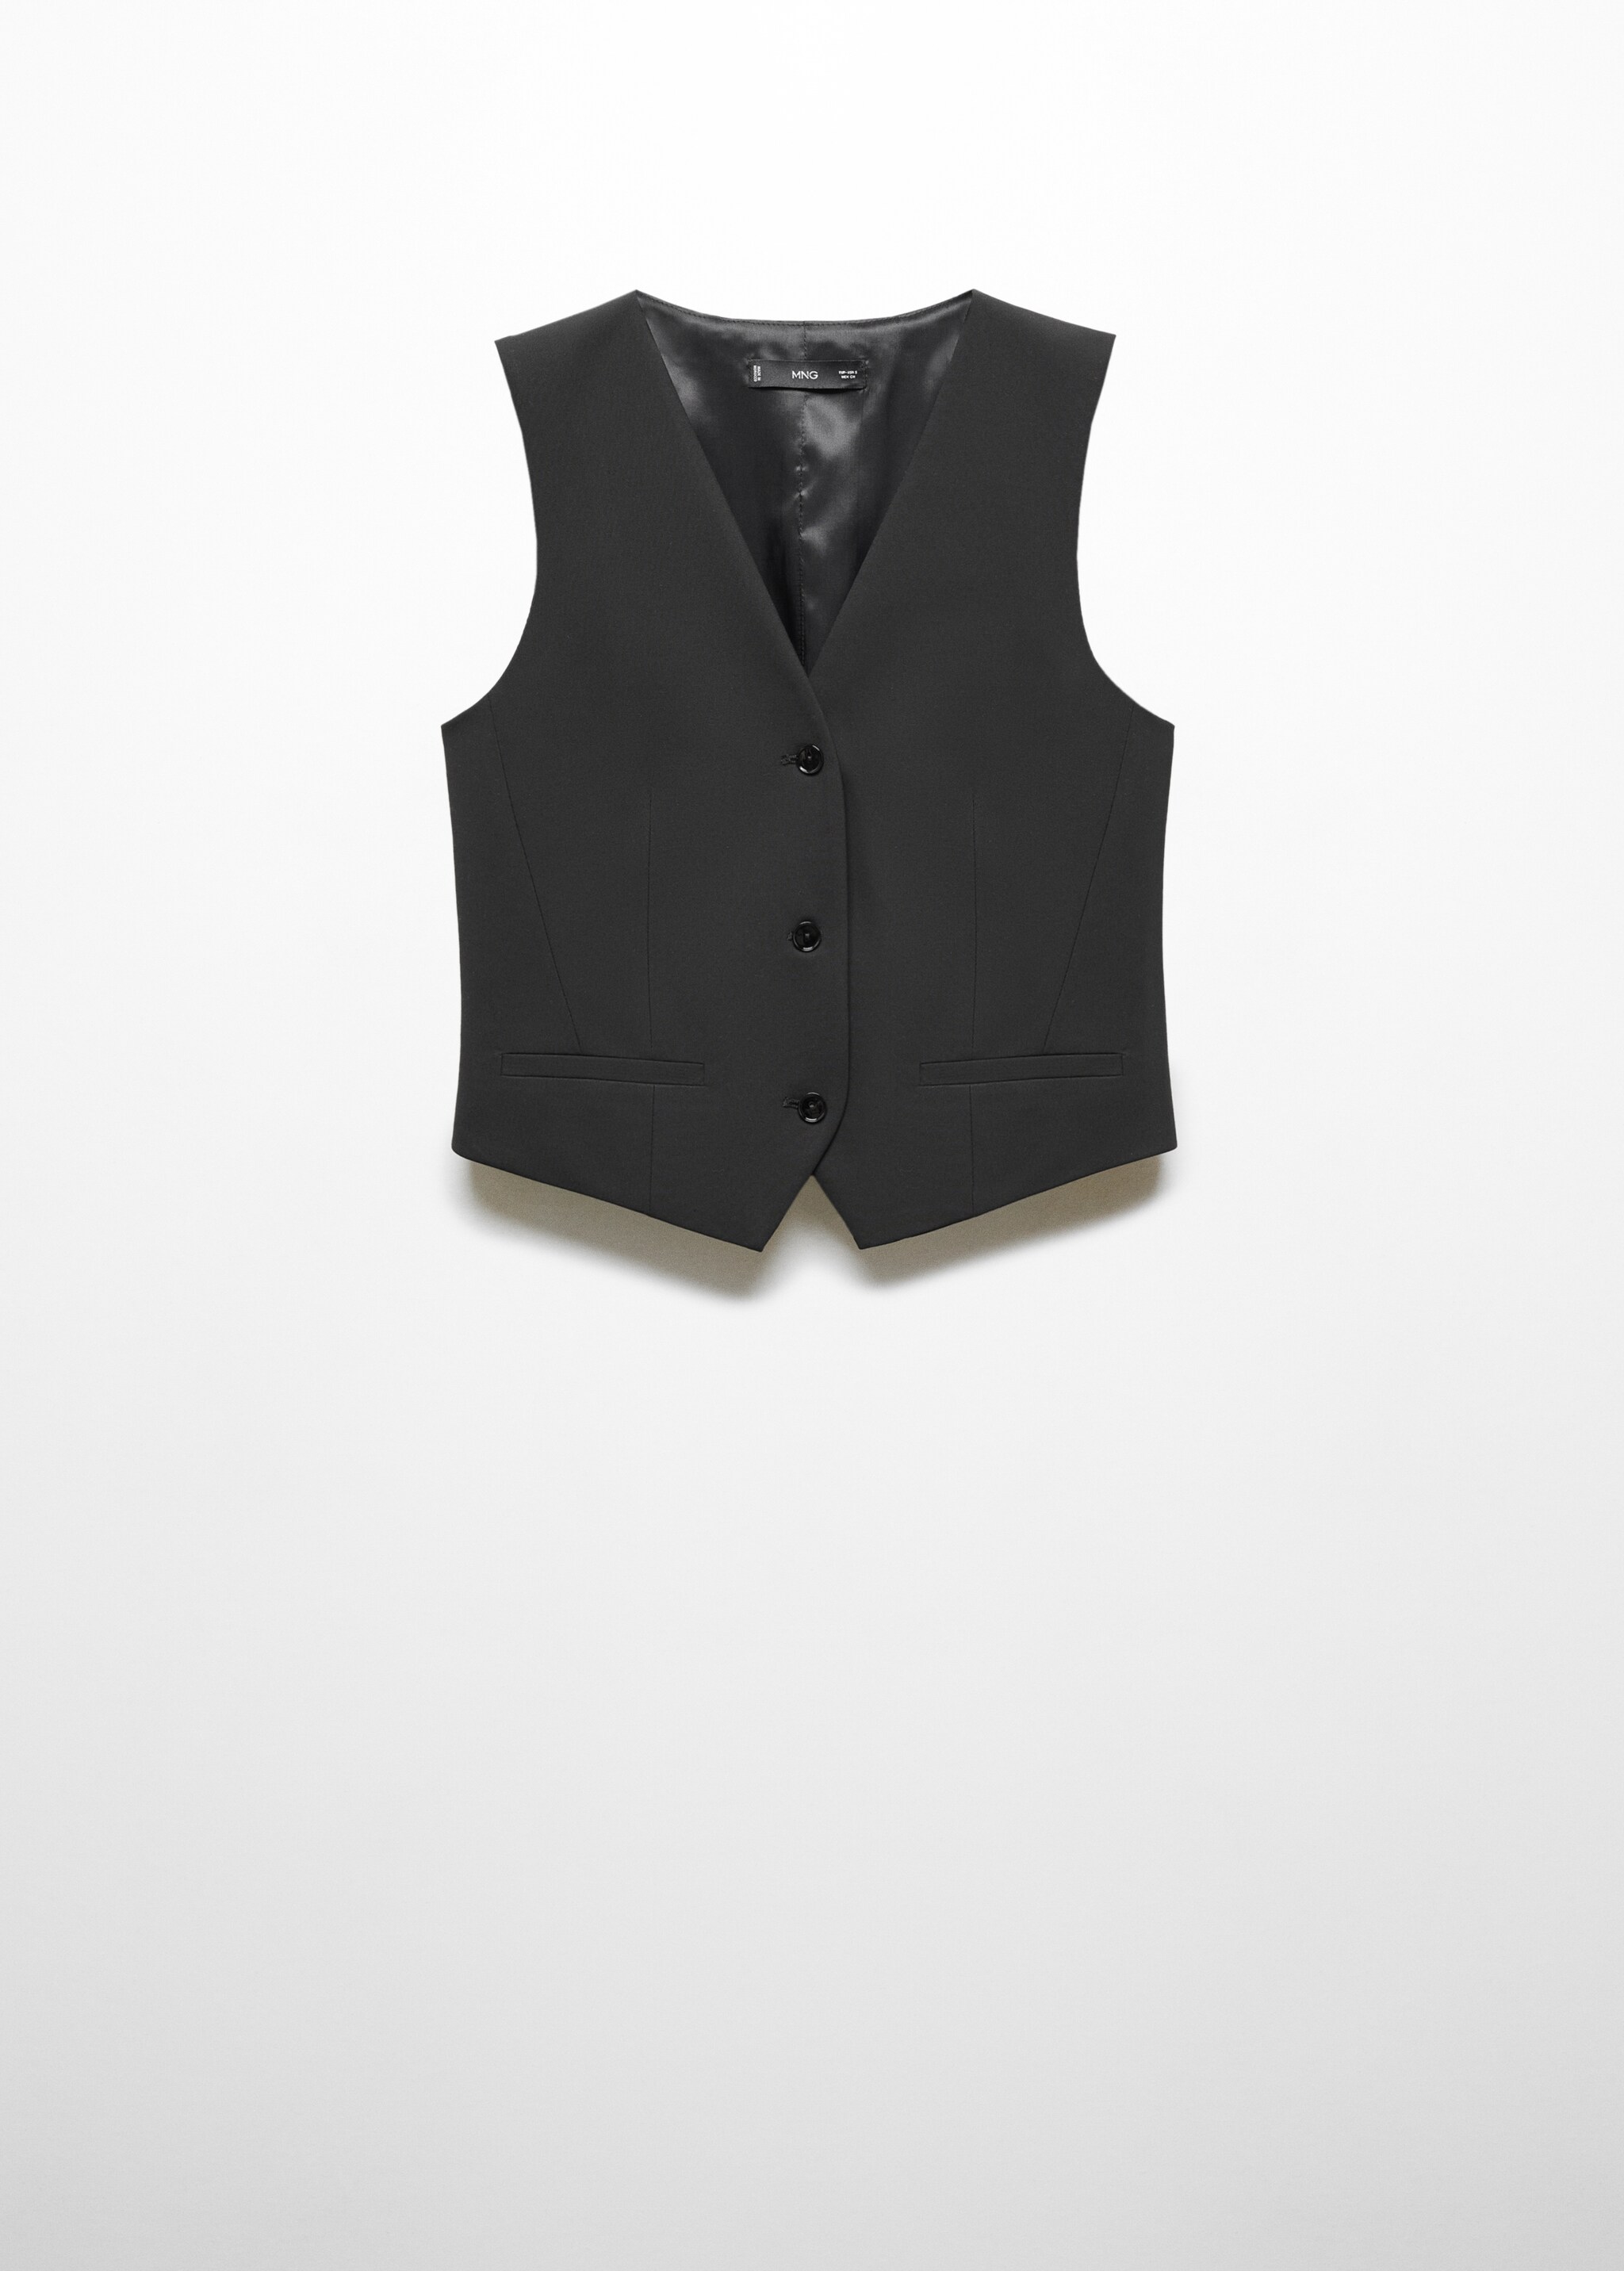 Suit vest with buttons - Article without model